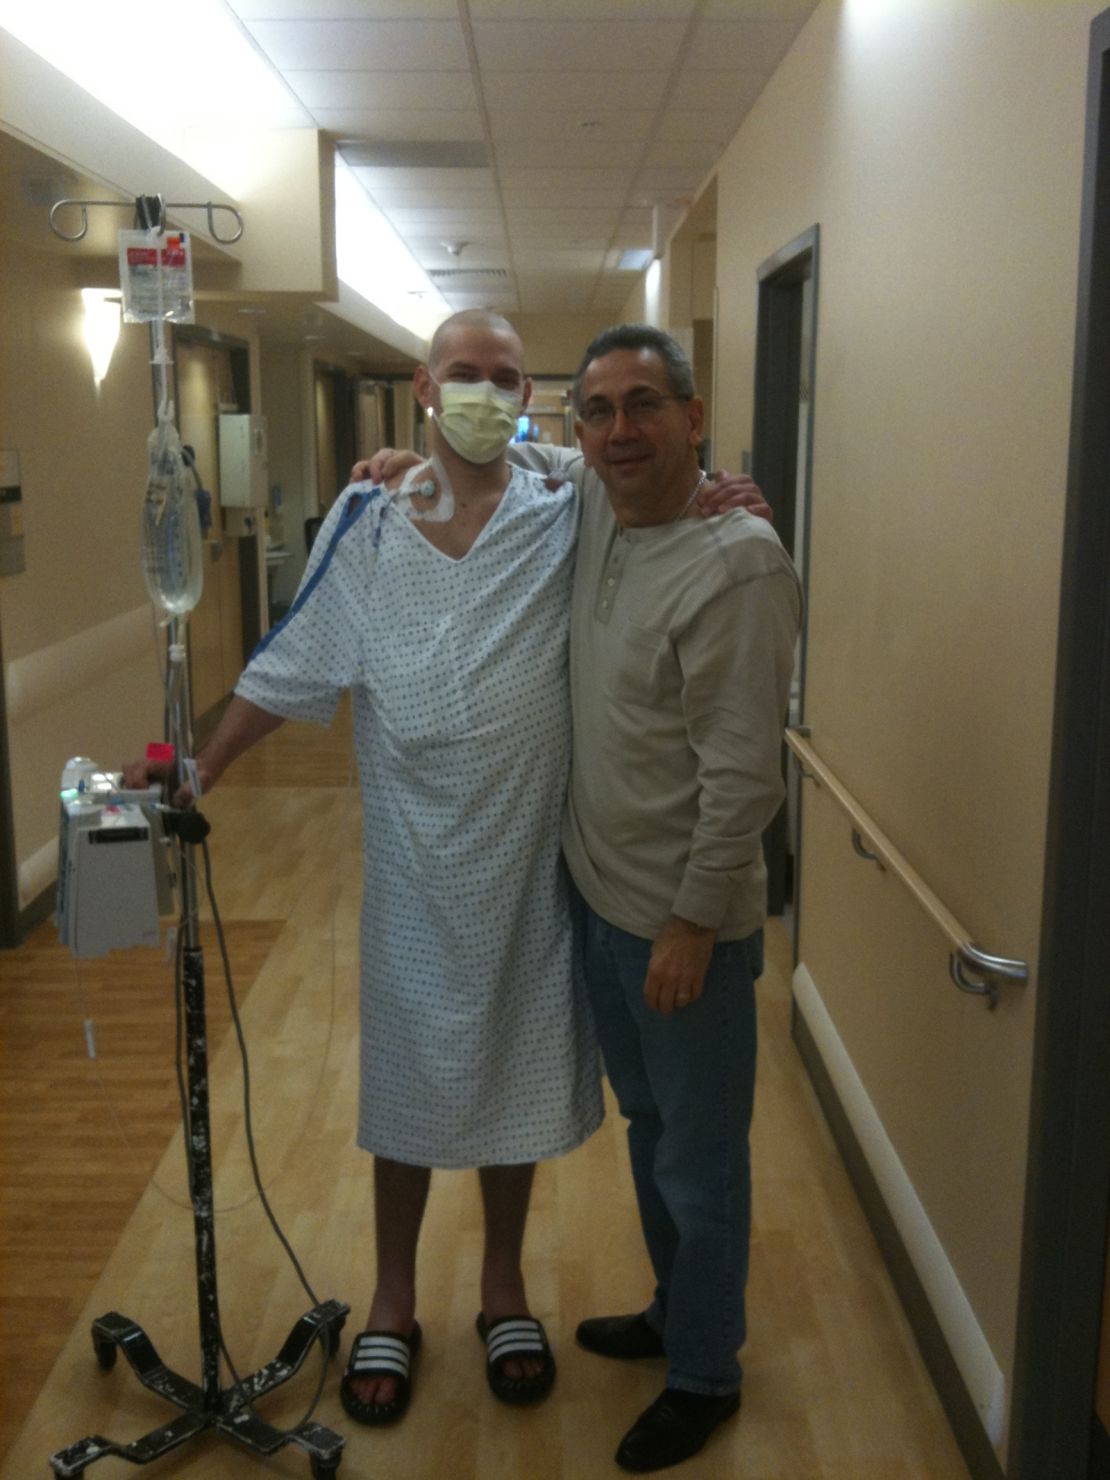 David Fajgenbaum poses with his father during one of his hospital stays.